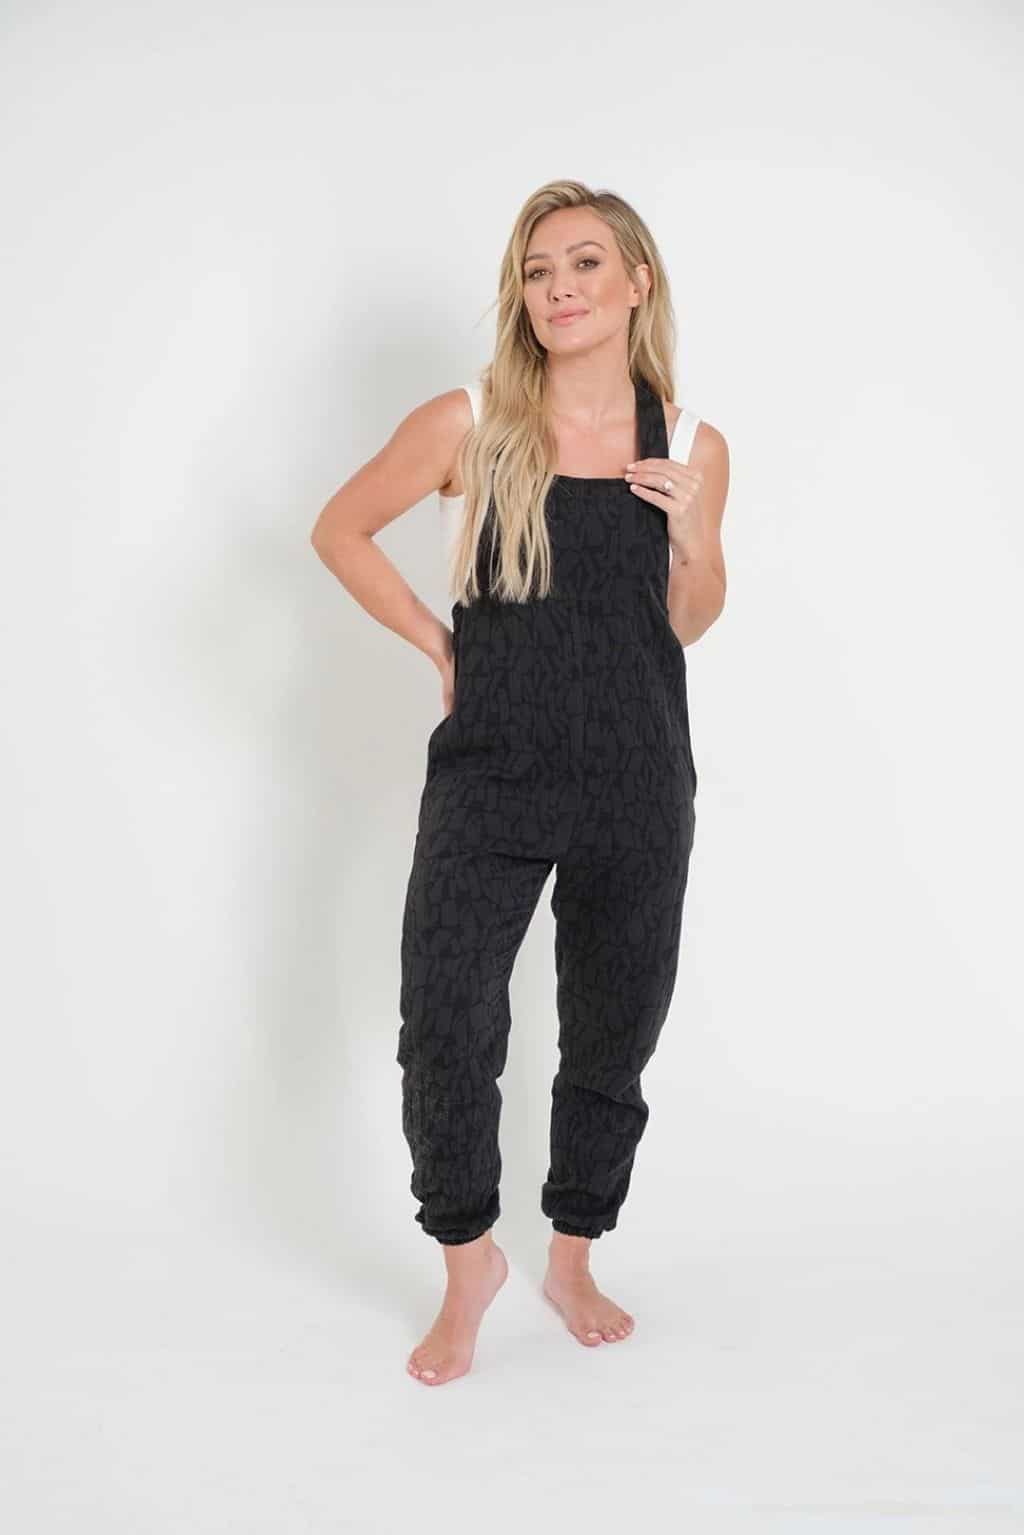 Hilary Duff Posing for Smash + Tess Collection 2021